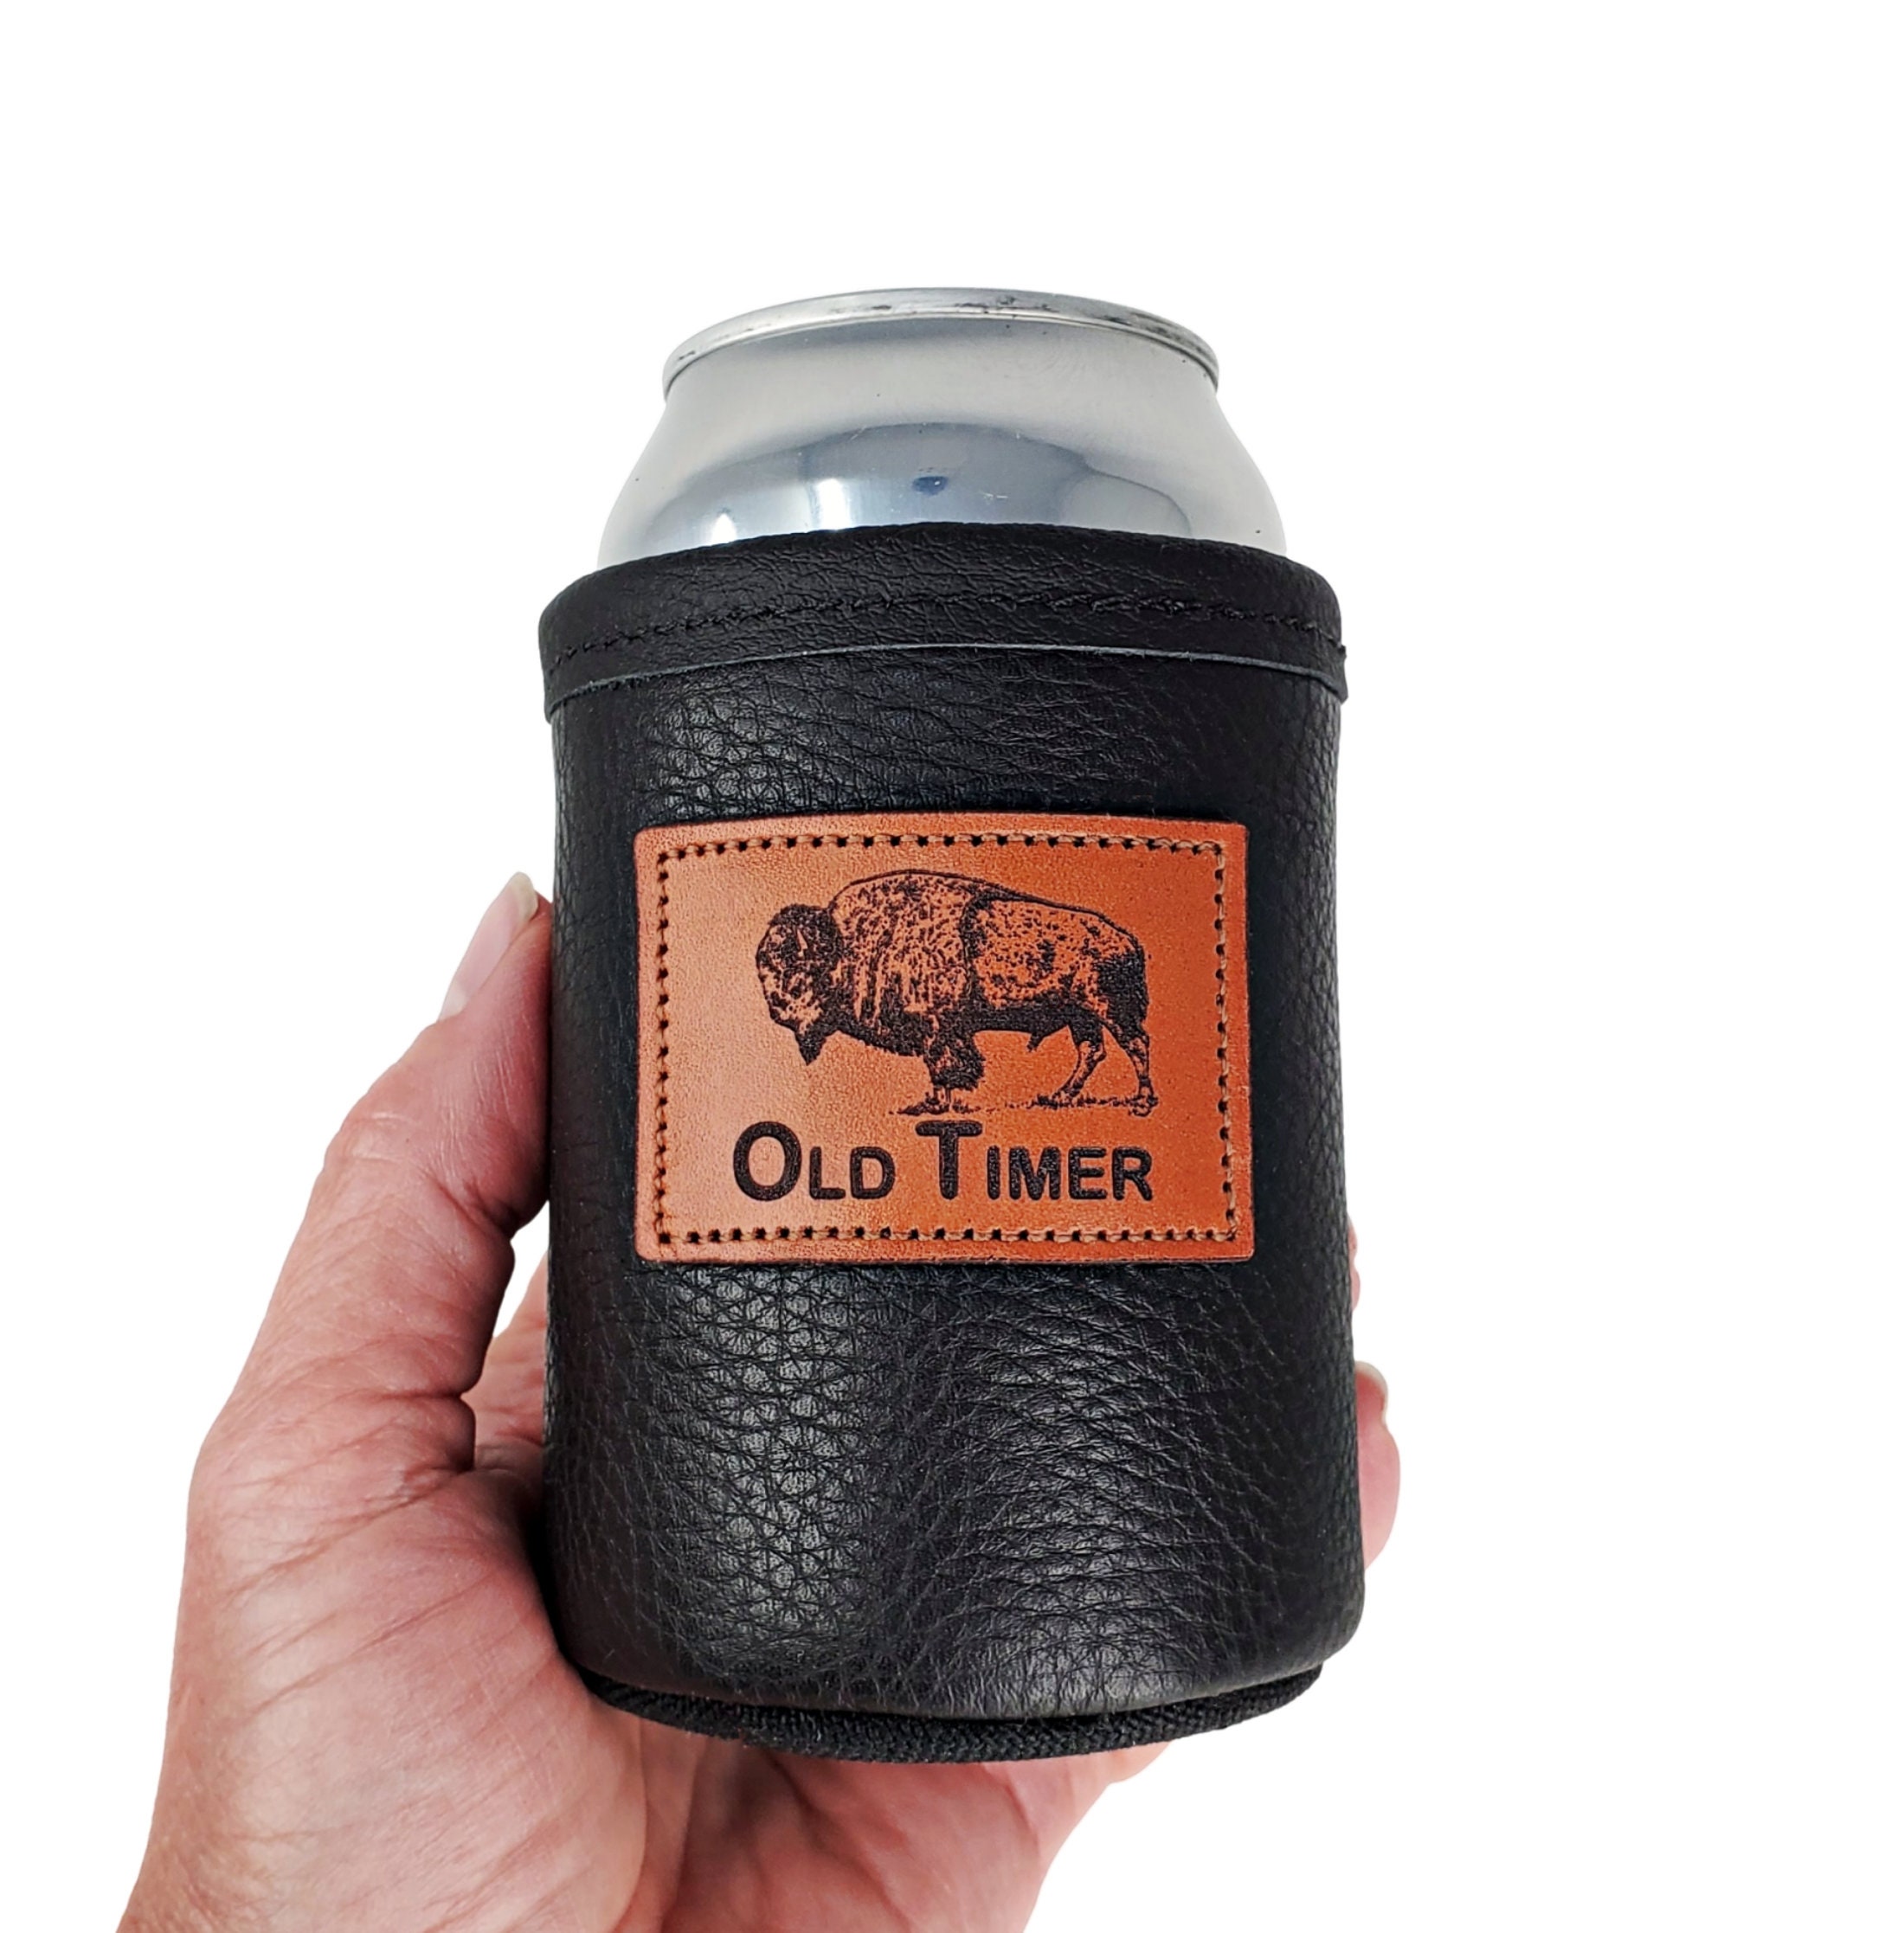 Premium leather football camo coozie – Drinking hides